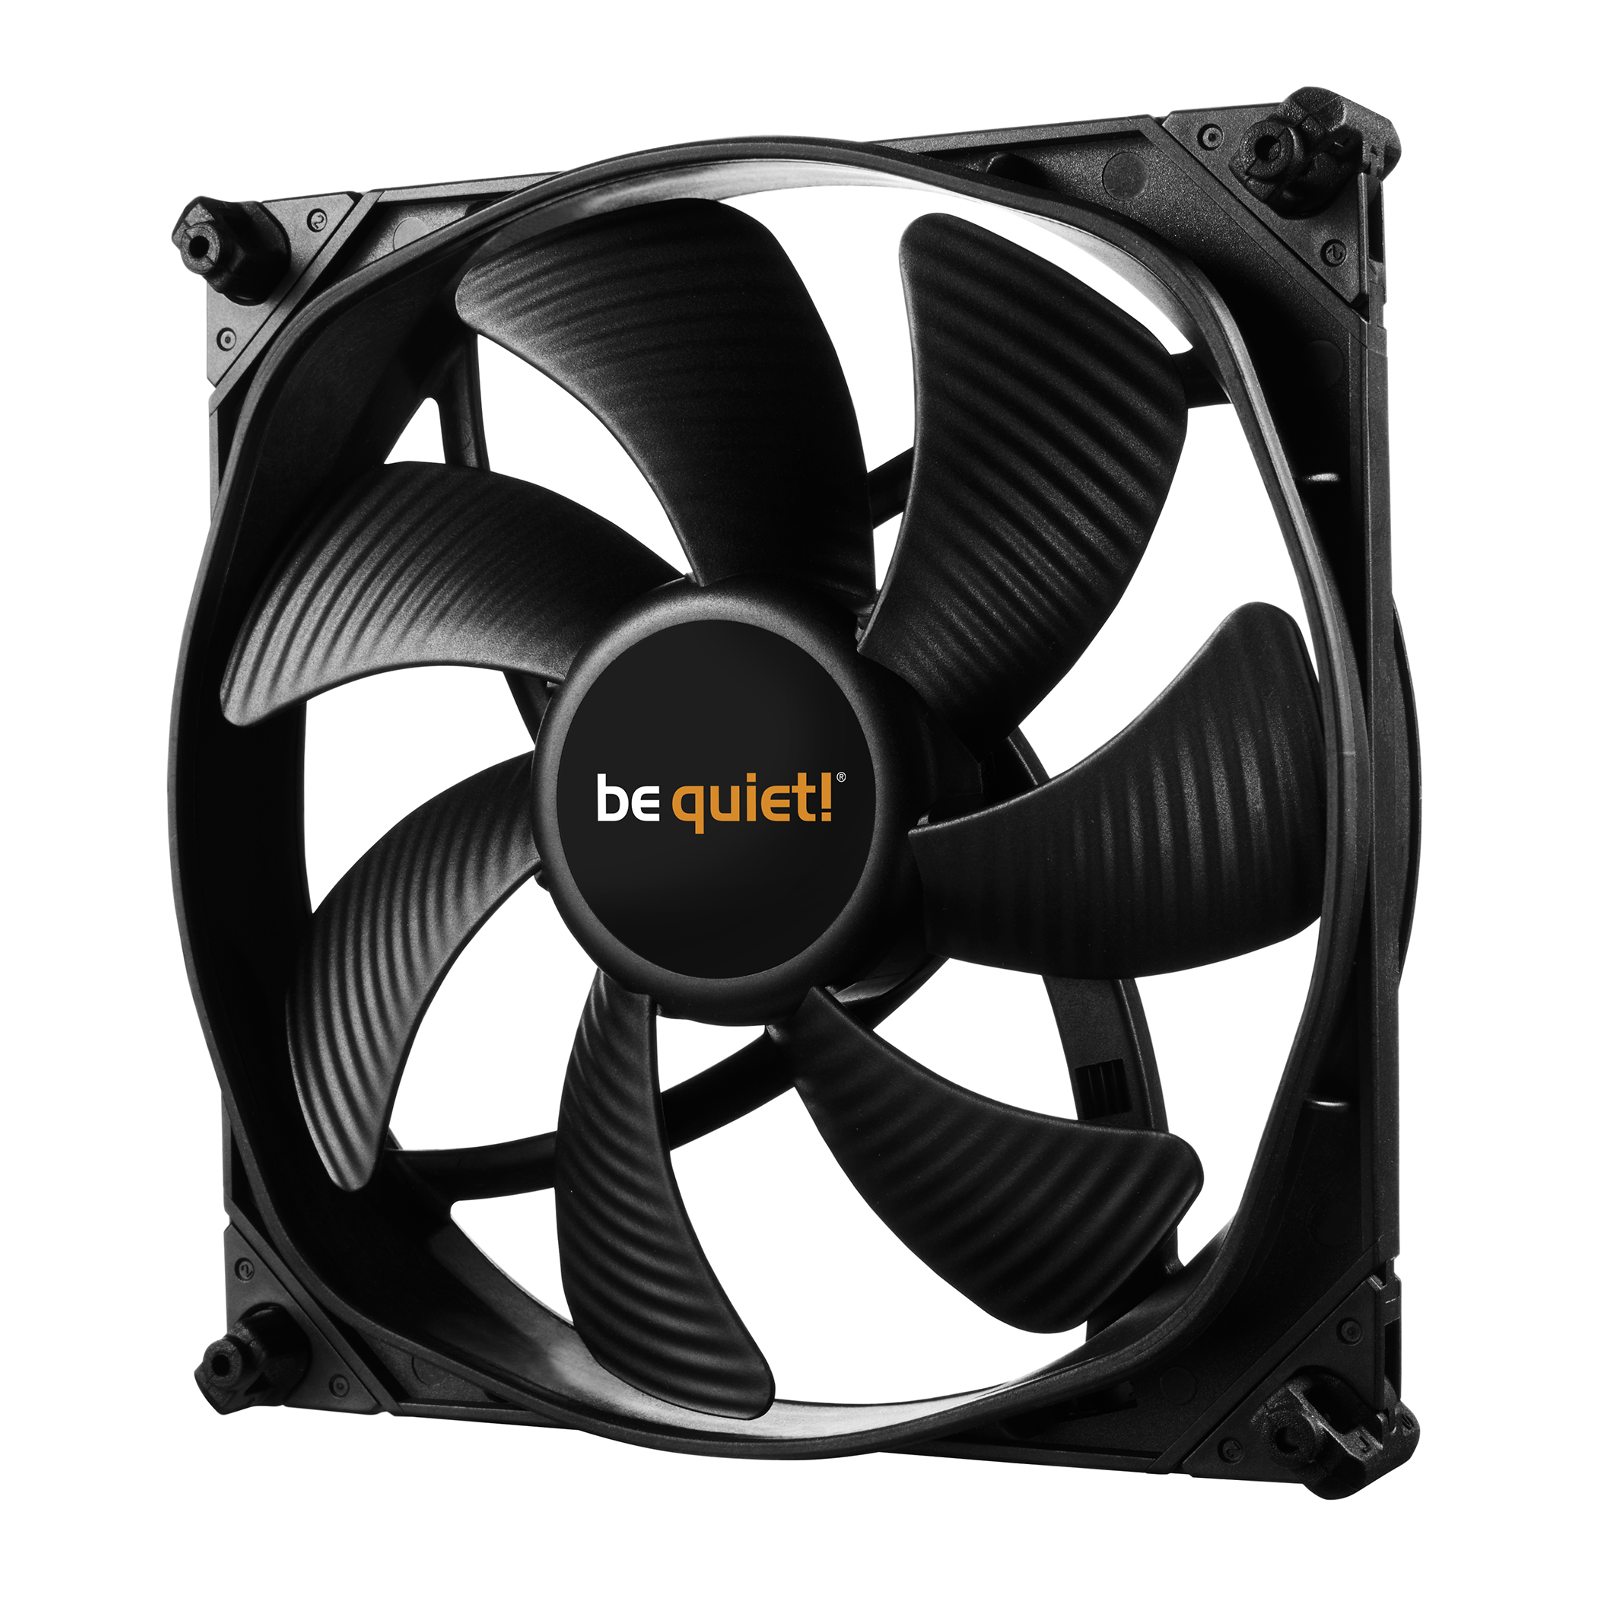 be quiet! - be quiet Silent Wings 3 140mm PWM High Speed Fan